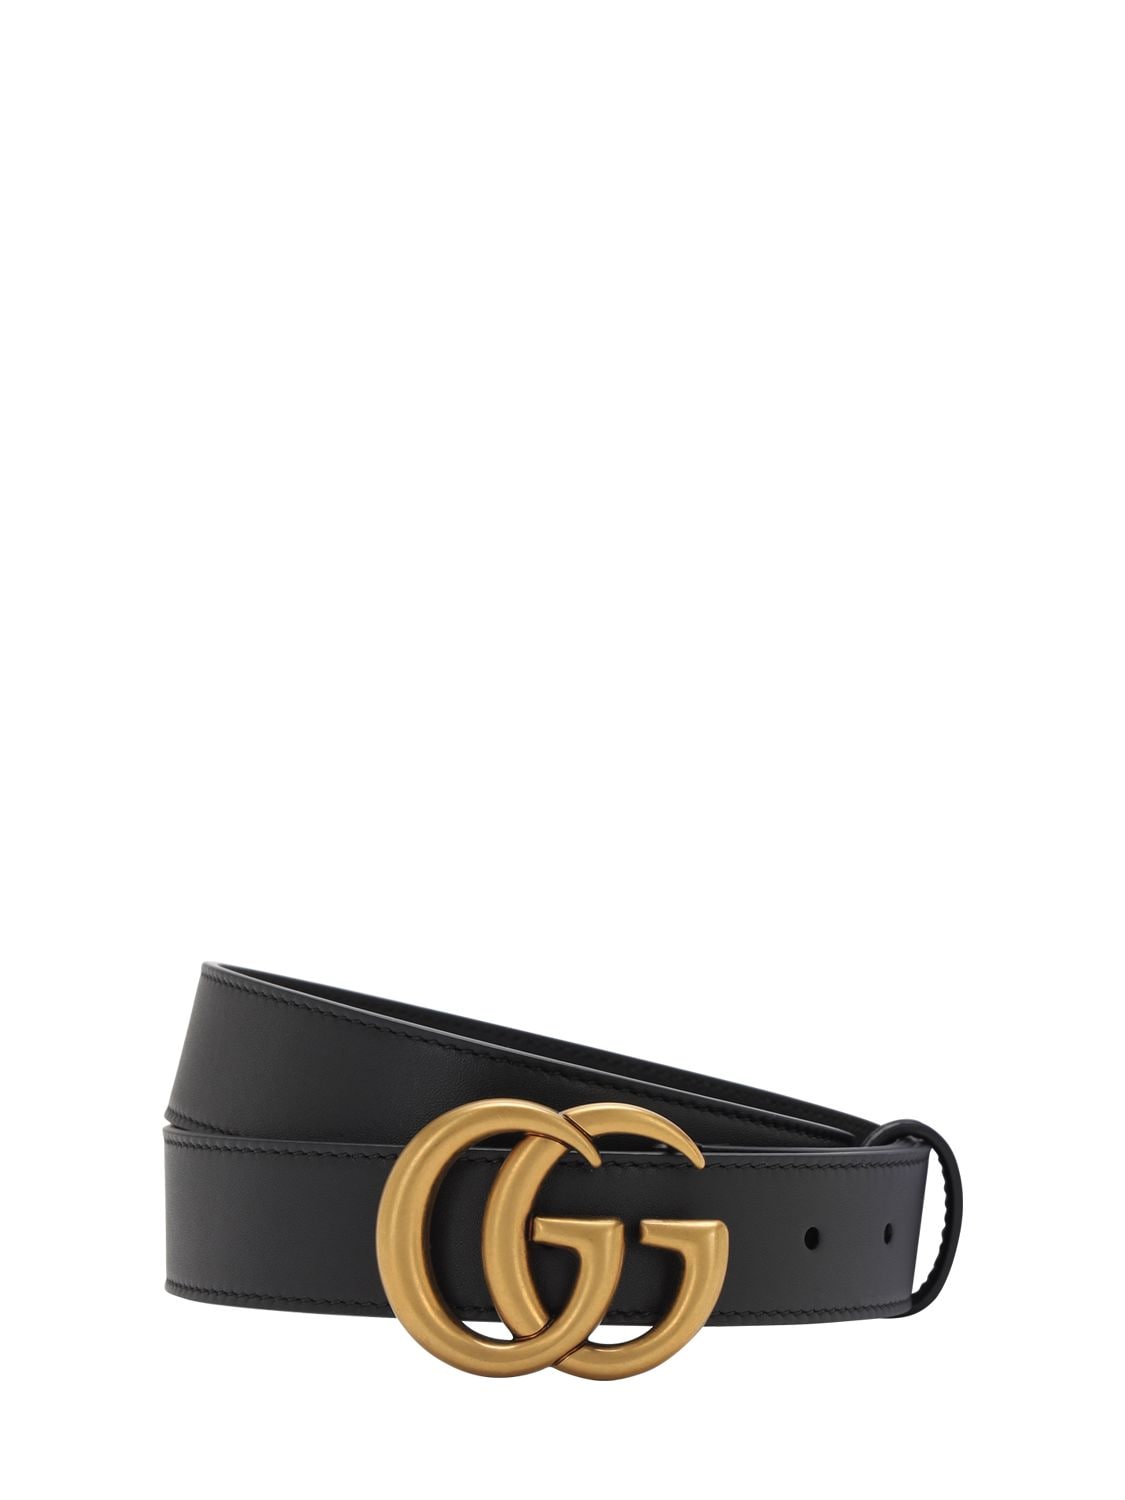 3cm Gg Gold Buckle Leather Belt | The Fashionisto